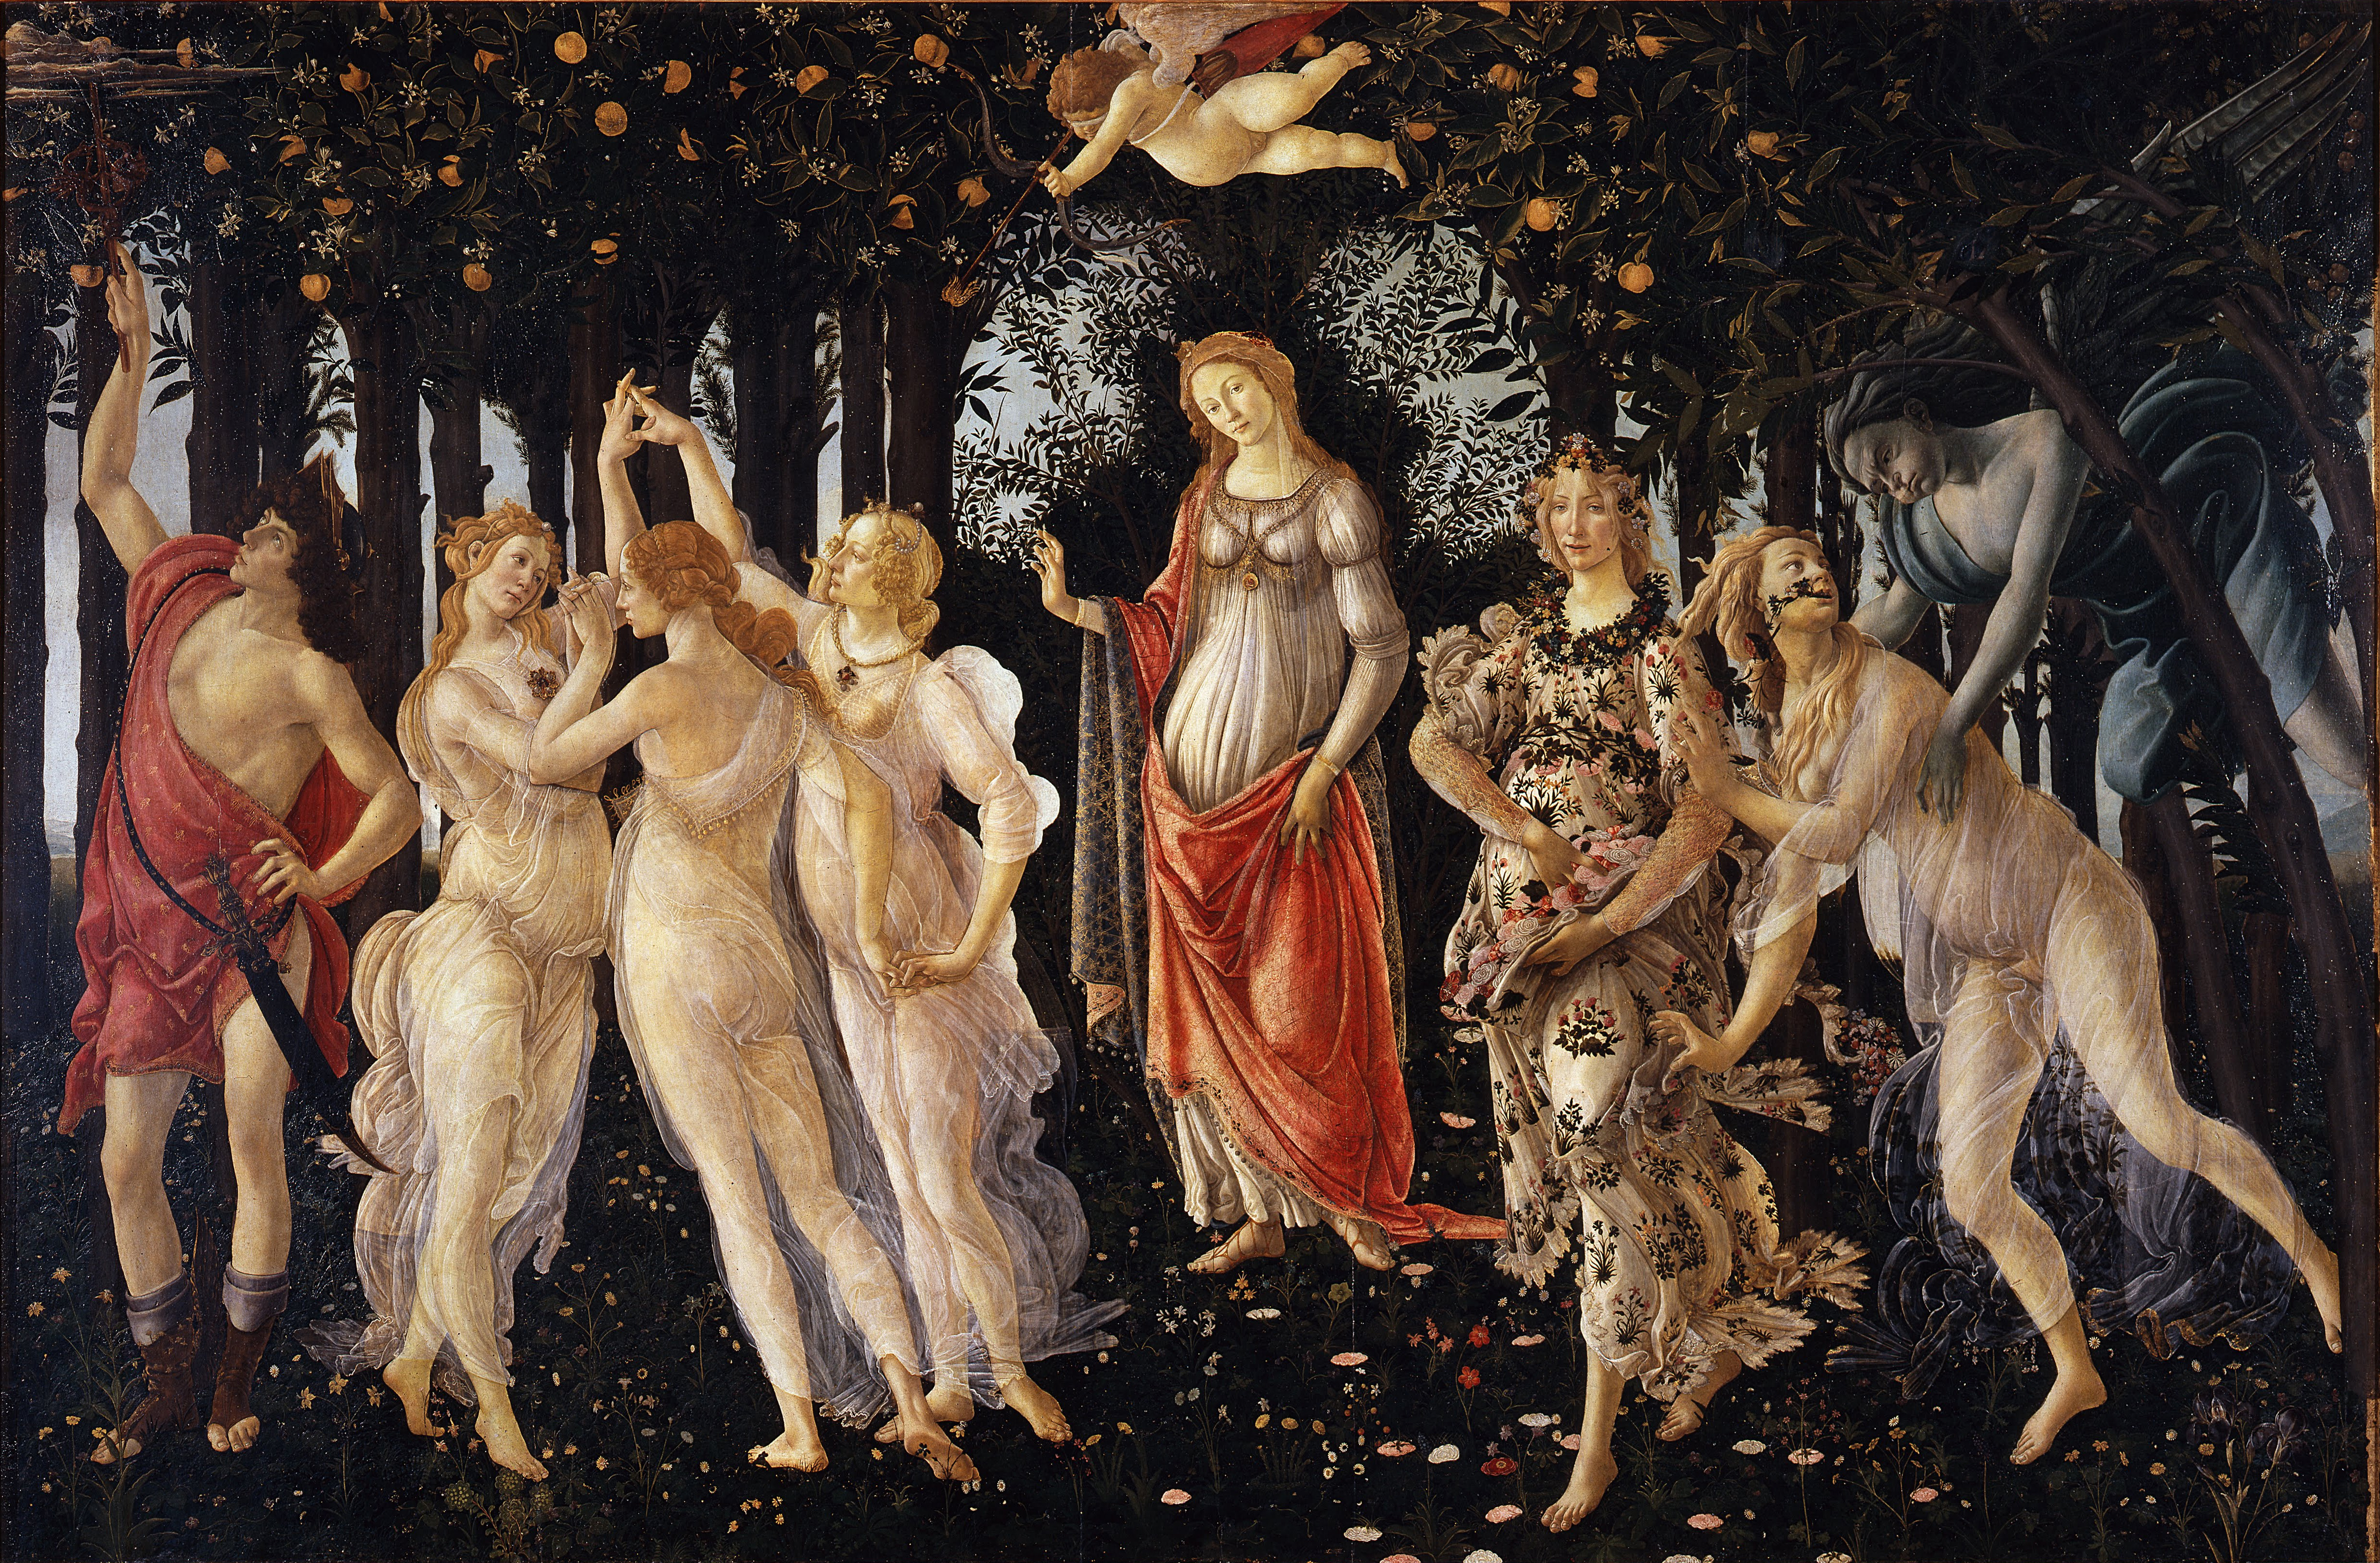 Venus with red drapery and blue dress stands slightly off centre, flanked on the left by the Three Graces and Mercury and on the right by the nymph Chloris, the goddess Flora, and March wind Zephyrus. A blindfolded Cupid with bow aimed left hangs over Venus.